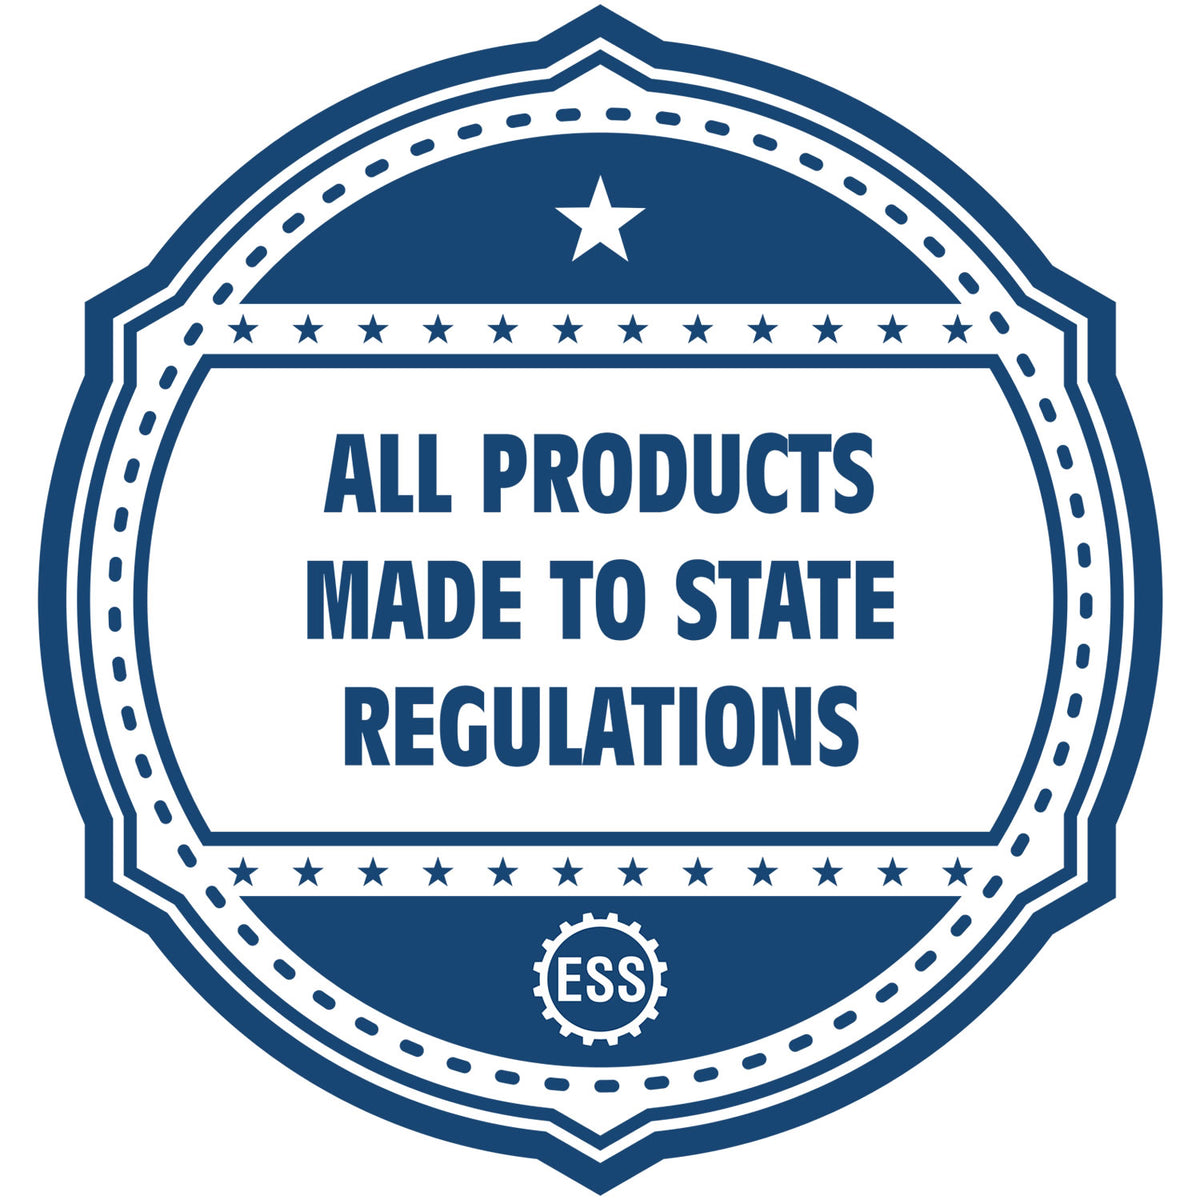 An icon or badge element for the Self-Inking Georgia Landscape Architect Stamp showing that this product is made in compliance with state regulations.